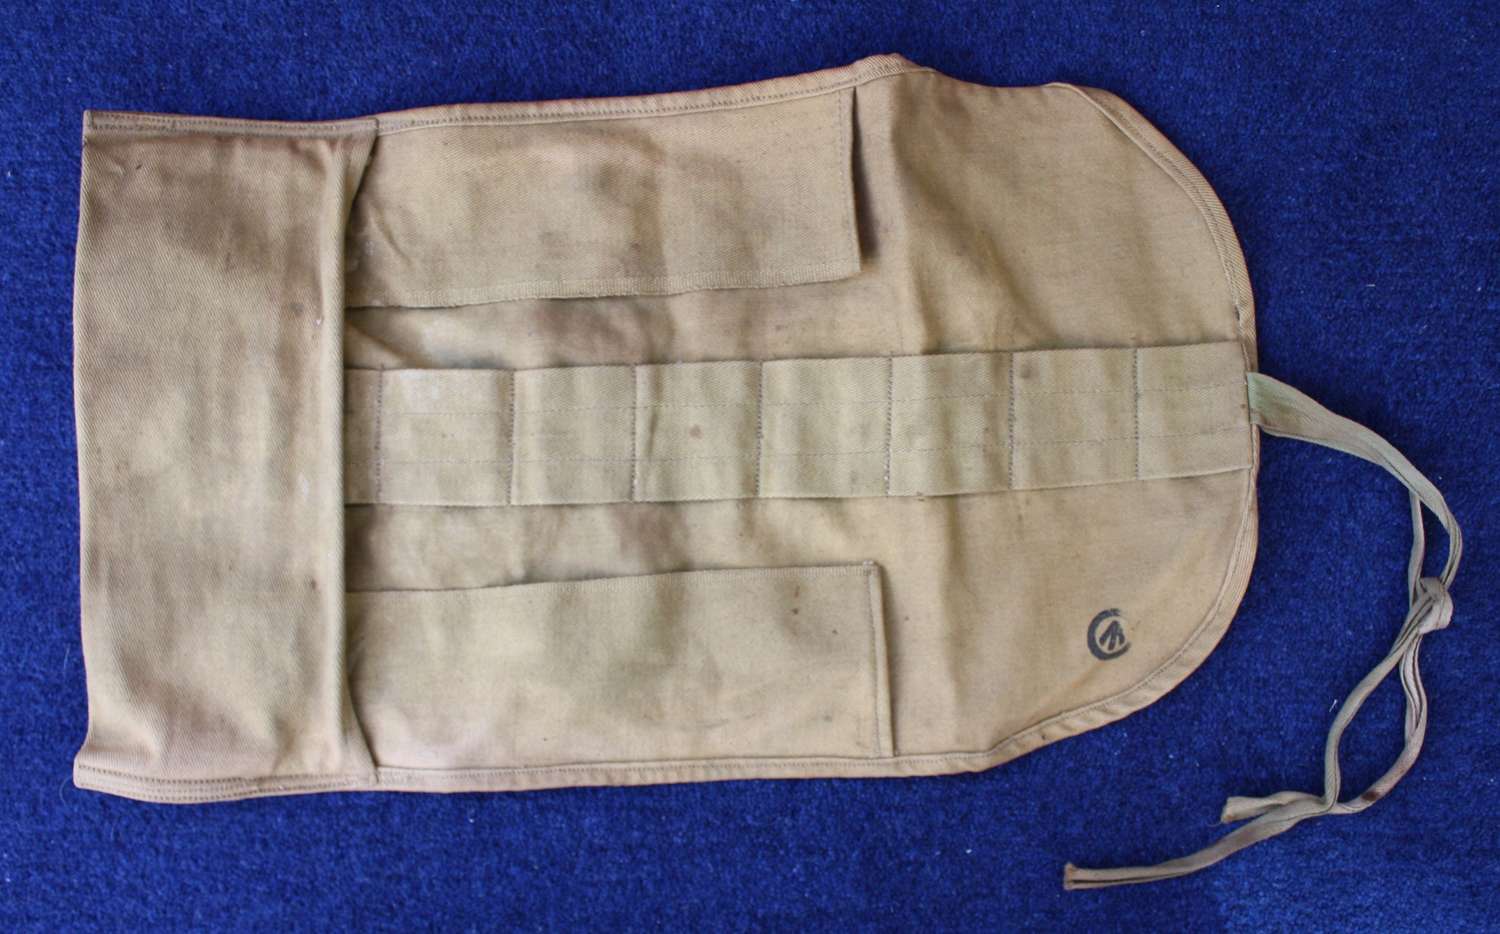 WW1 Canadian Made Khaki Cotton Holdall for basics & Hussif sewing kit